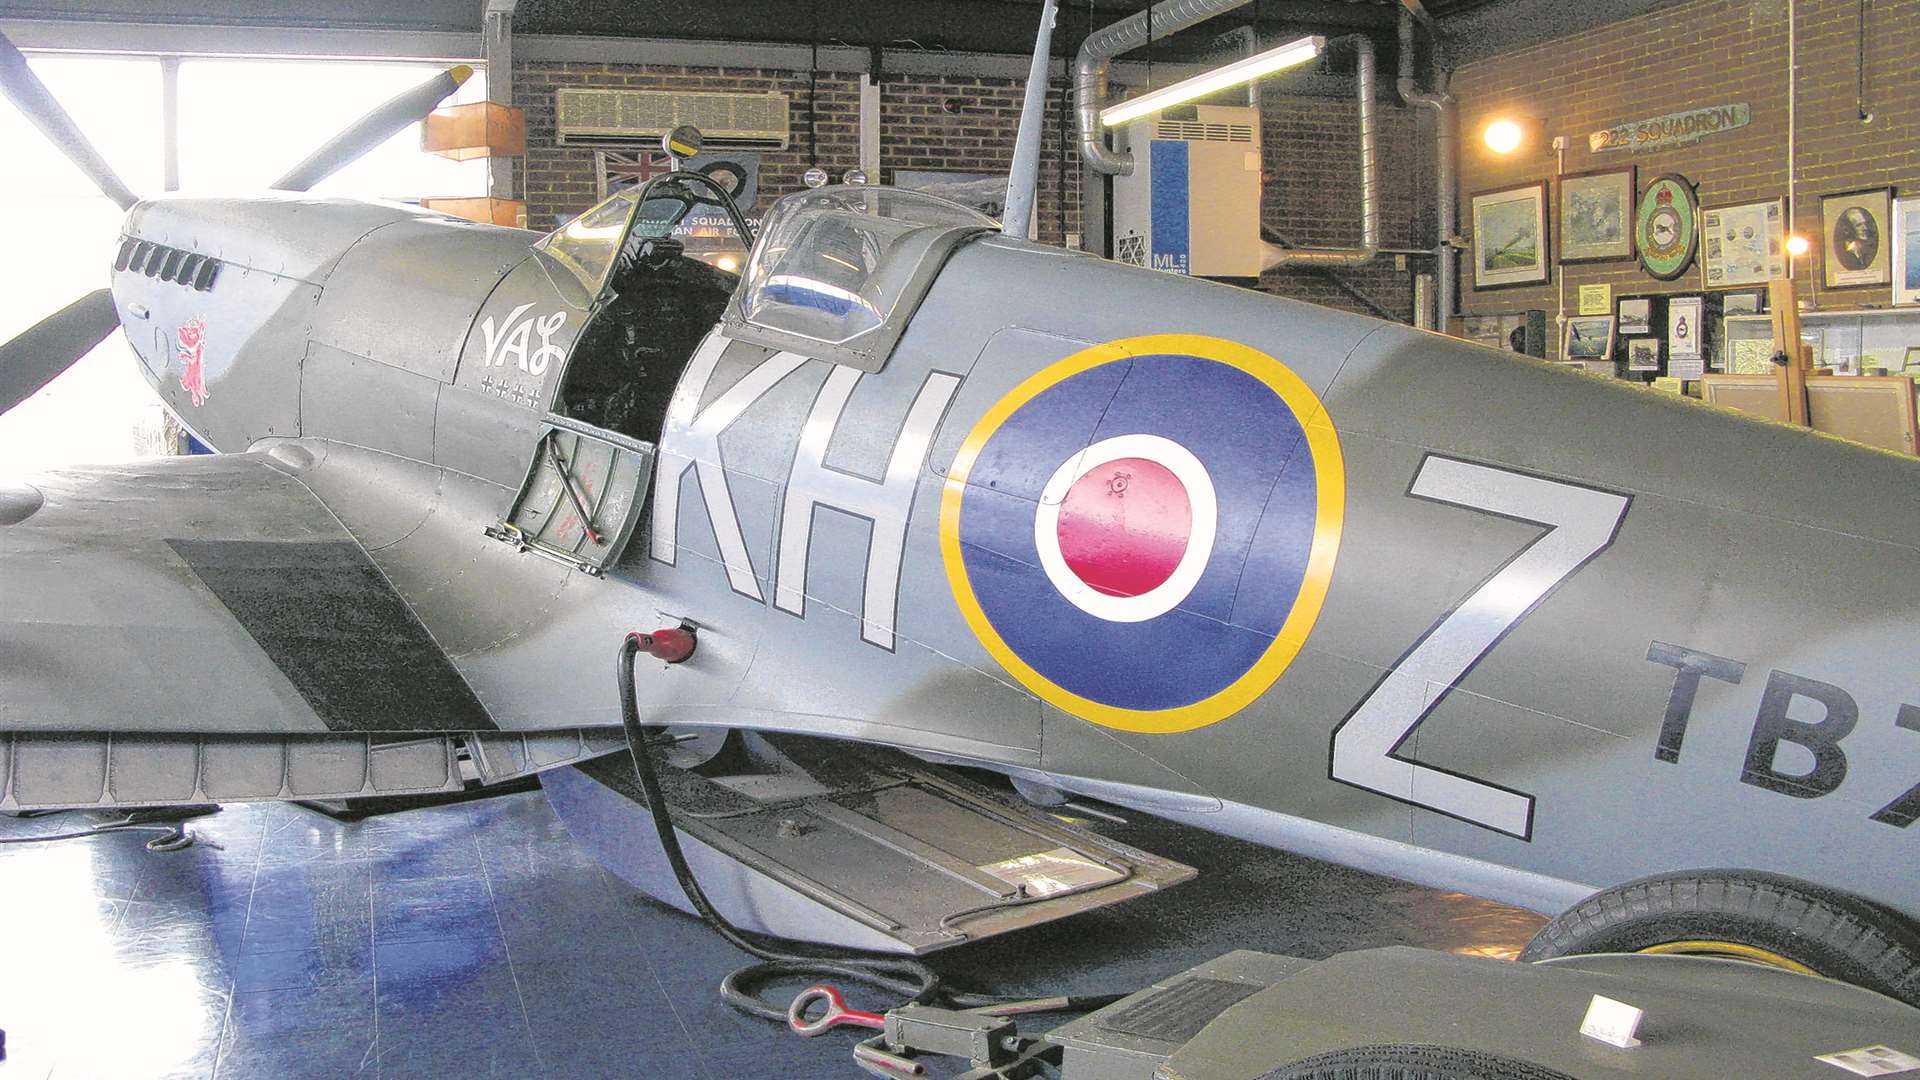 The Spitfire and Hurricane Memorial Museum at Manston